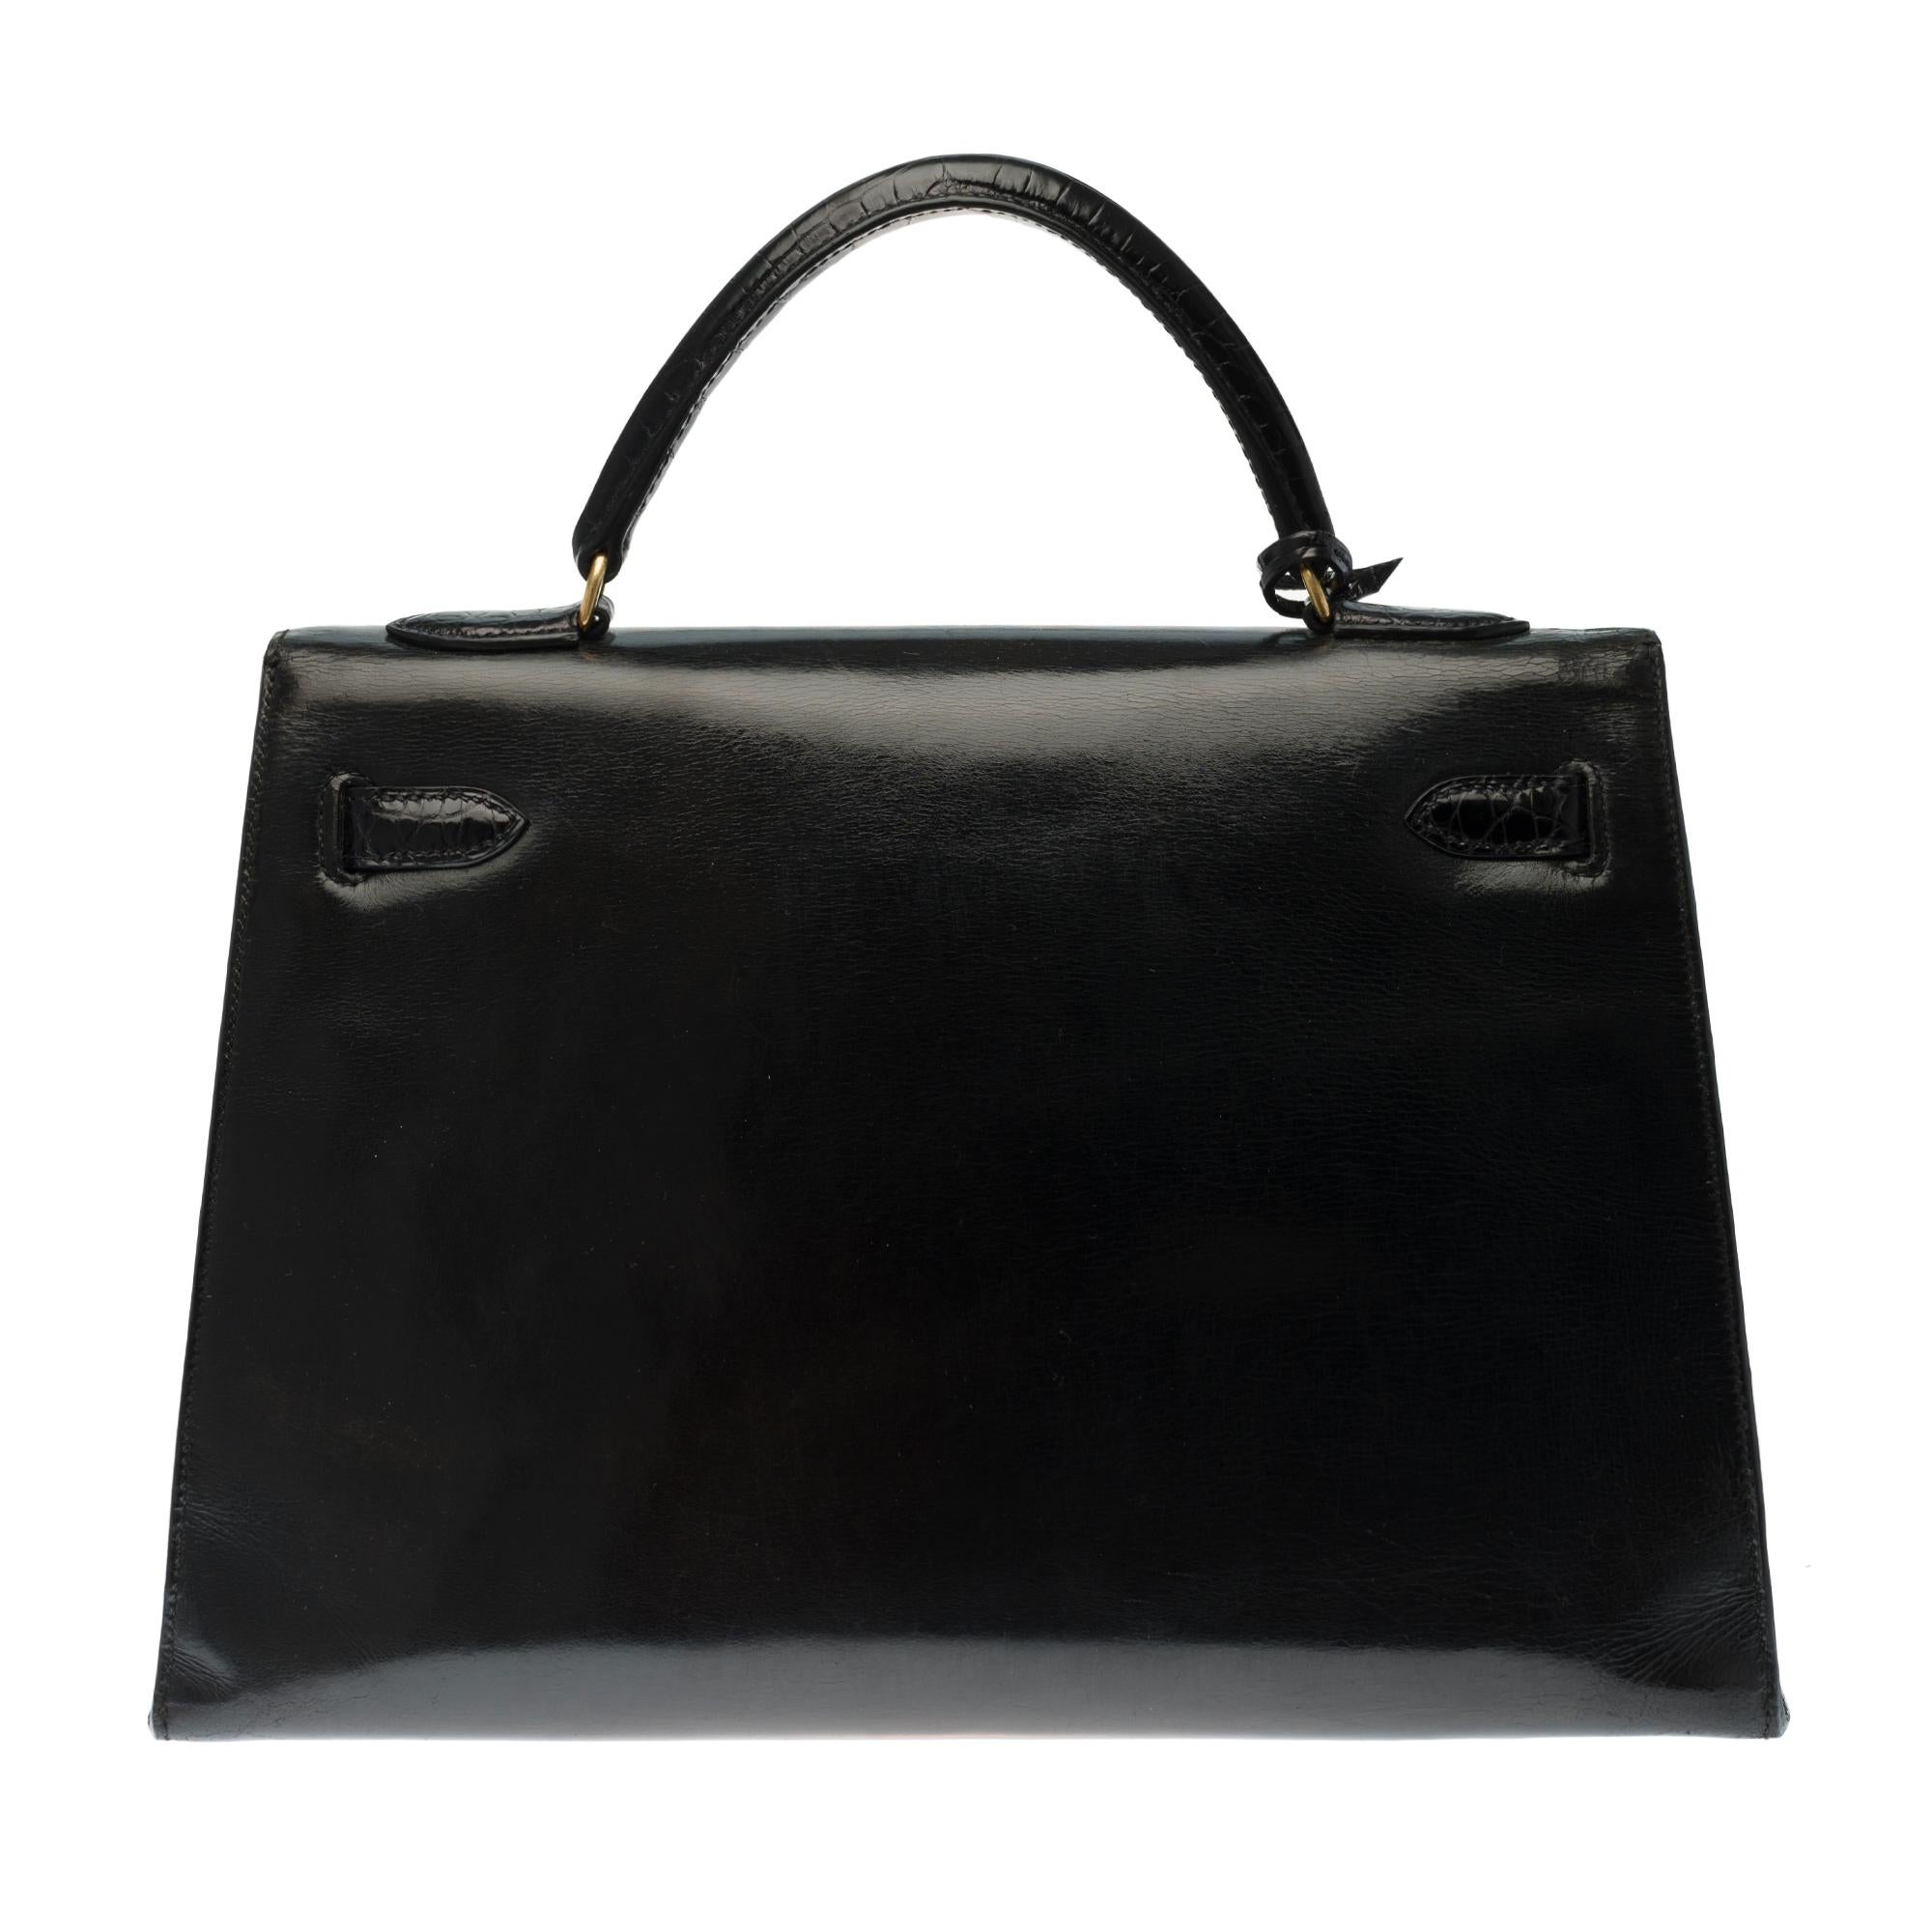 Hermès Kelly 32 turned over black leather box bag customized with two superb black Porosus crocodile bands on the flap, strap added in black crocodile (not signed), fasteners and clasp in gold-plated metal, handle in new black leather box, new black